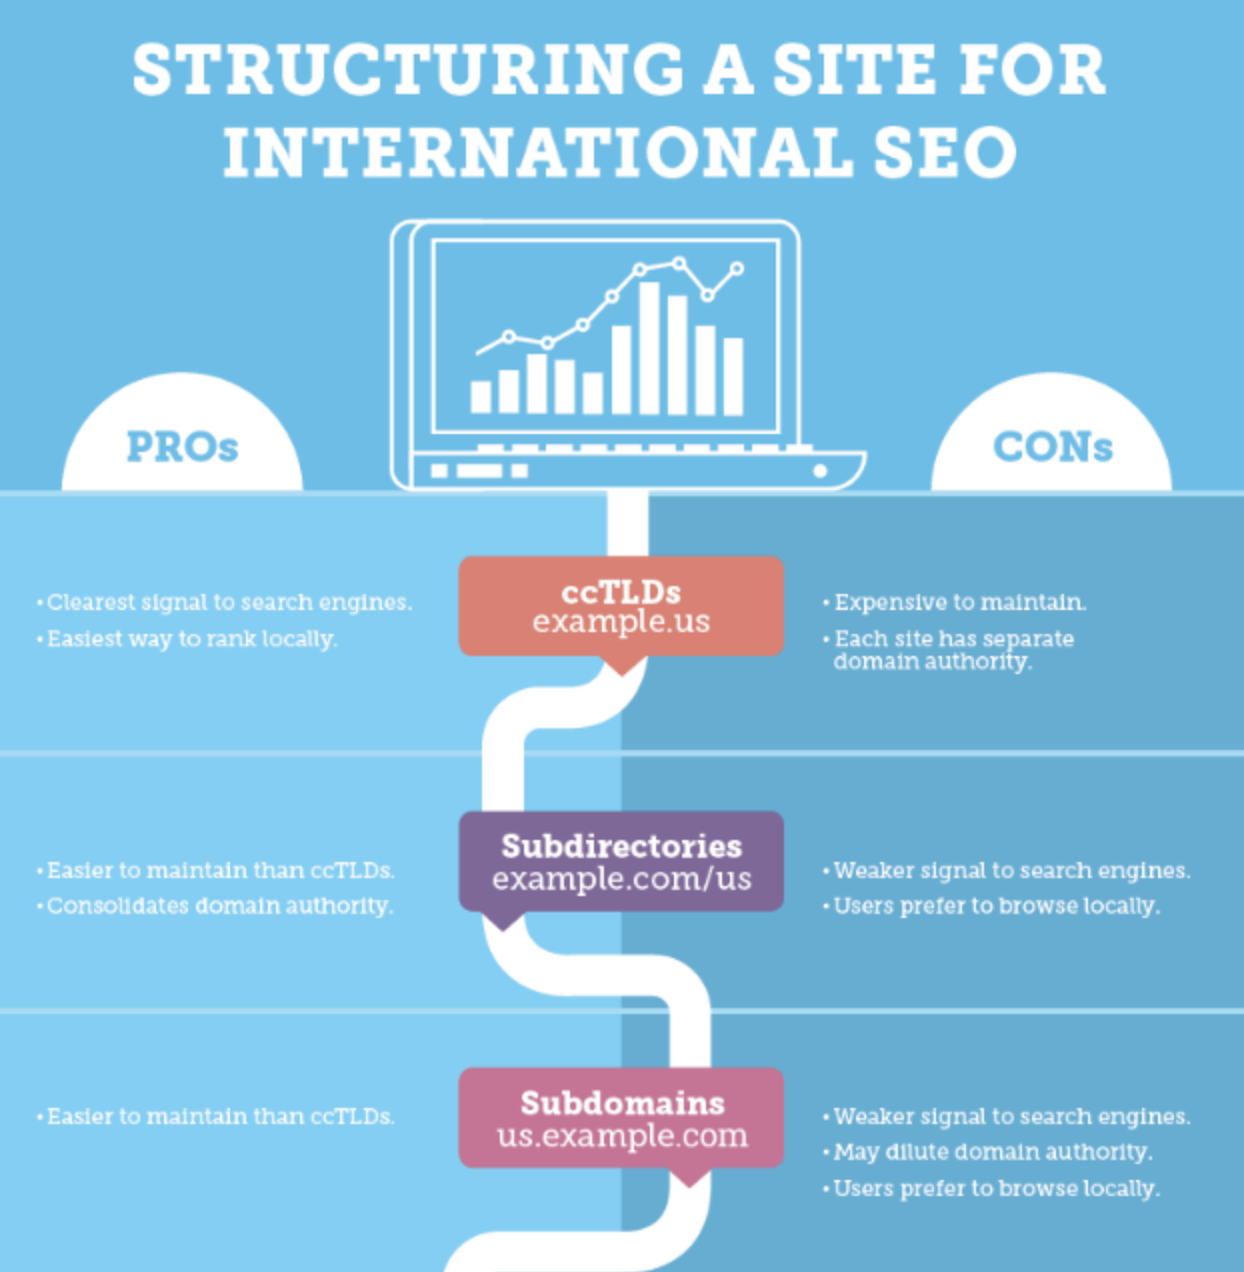 Pros and cons of structuring a site for international SEO.